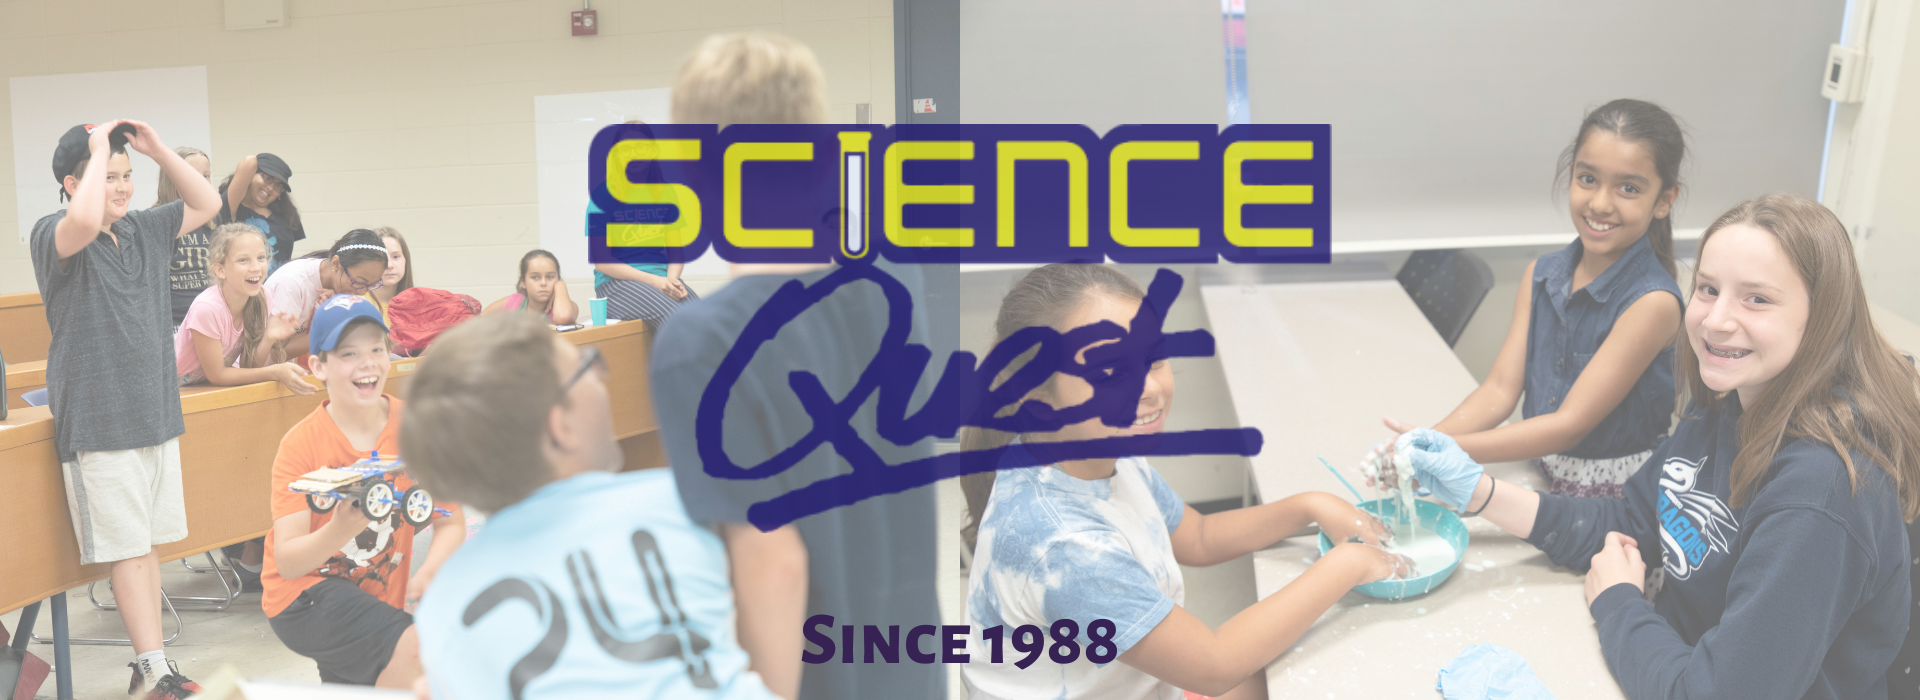 Science Quest